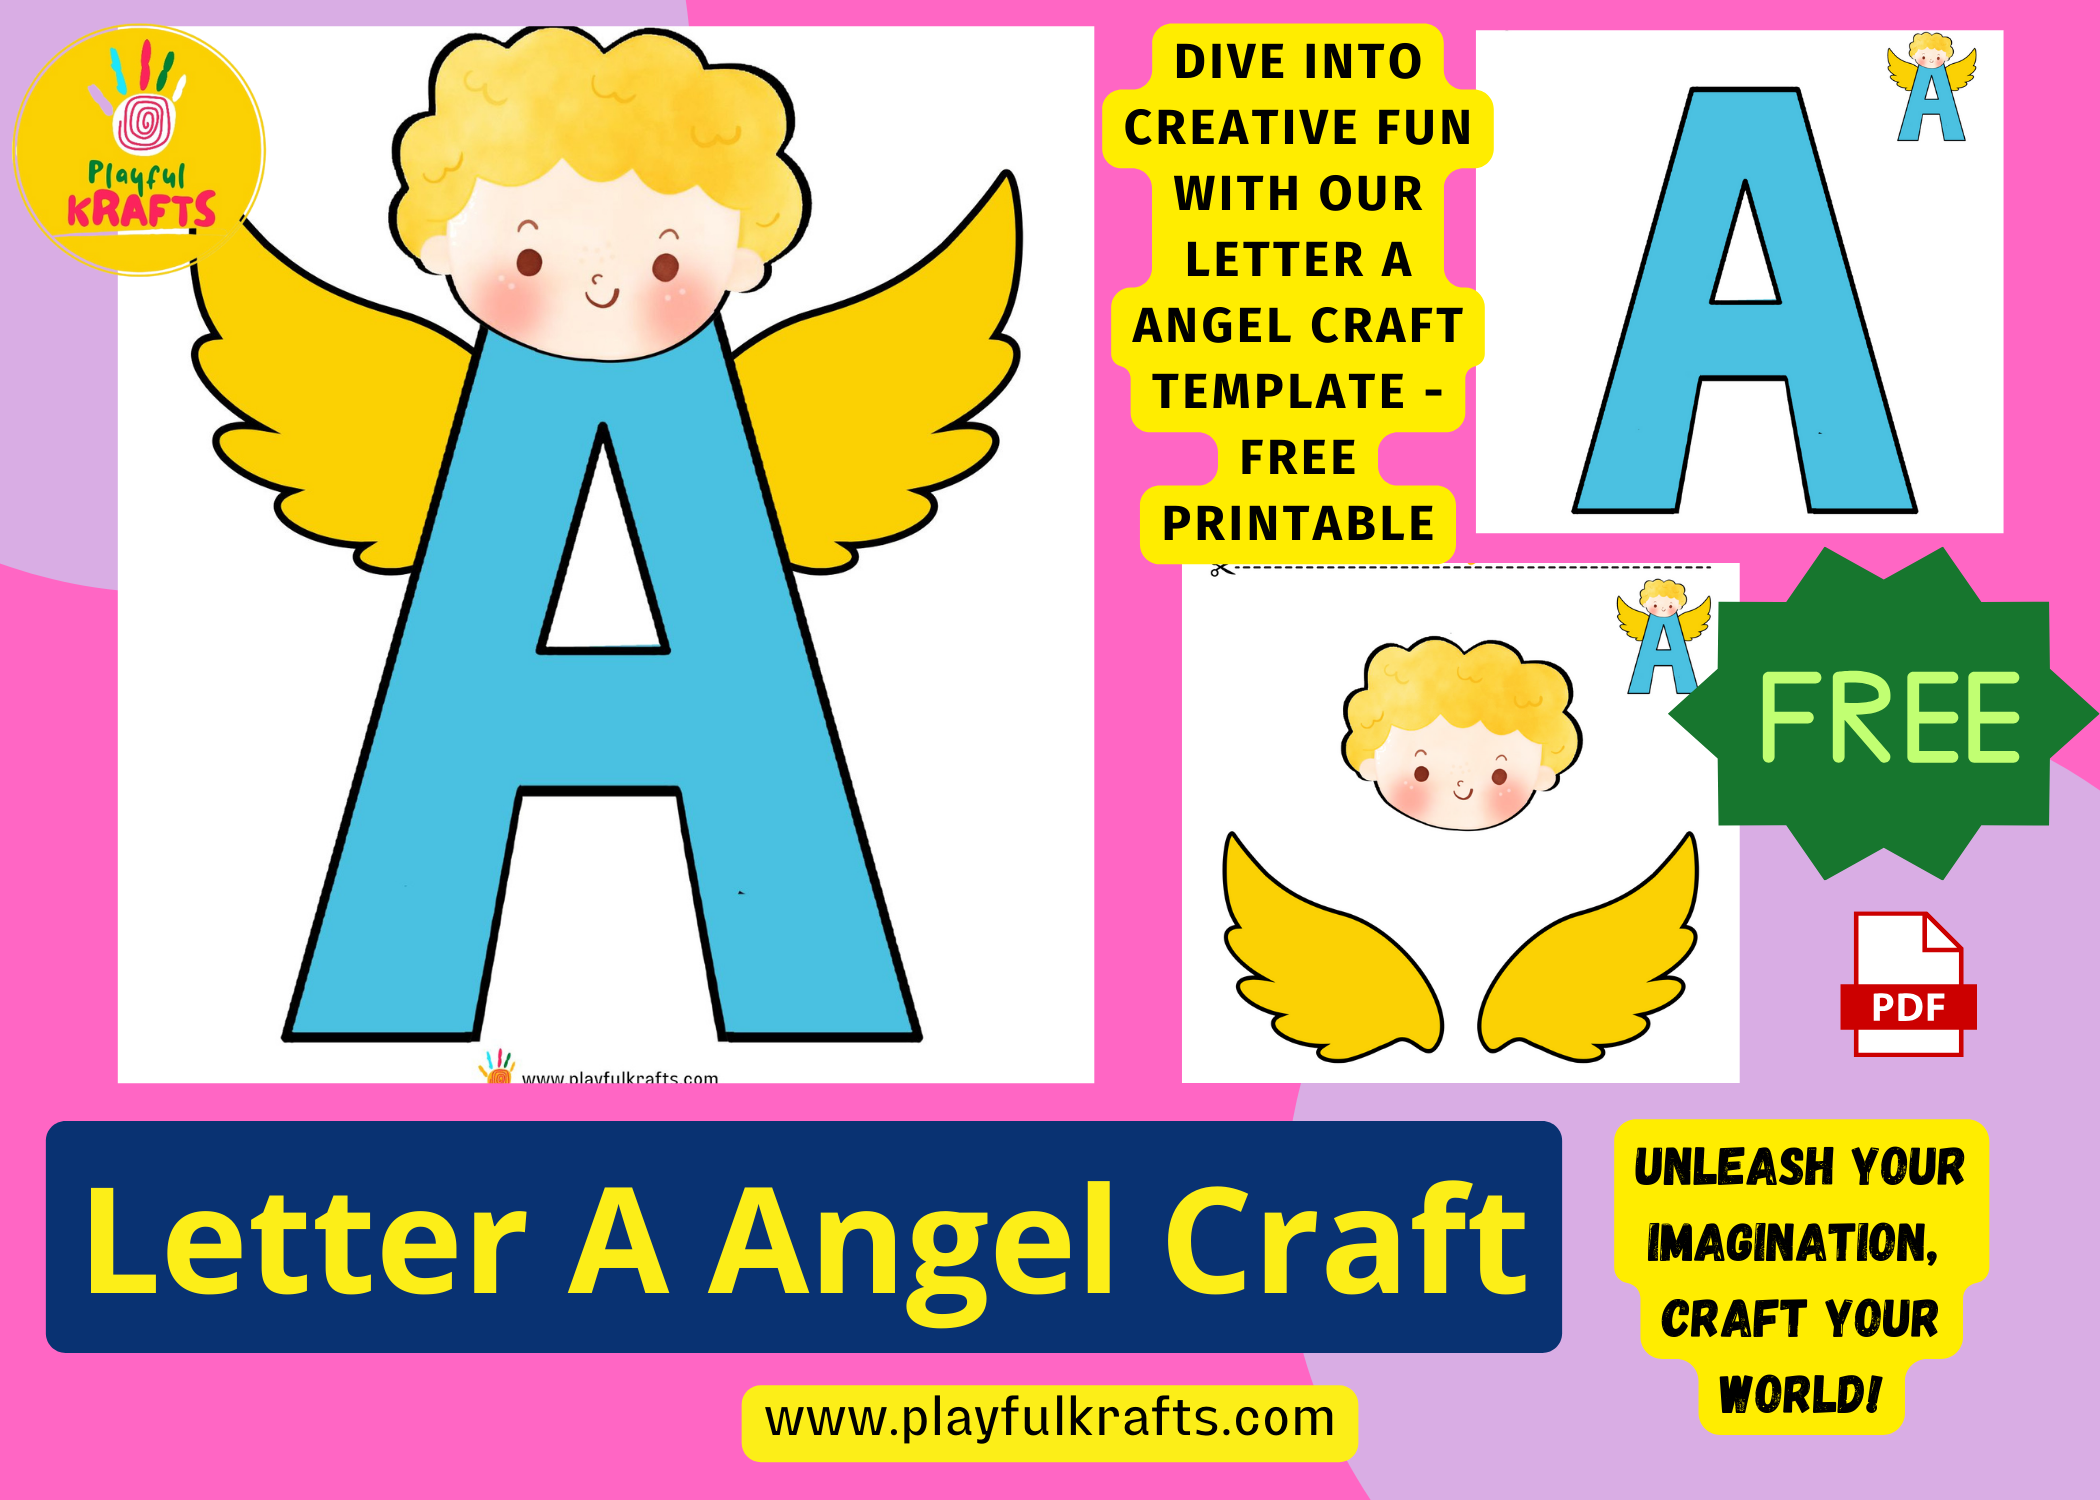 Letter-A-Angel-Craft-Free-Download